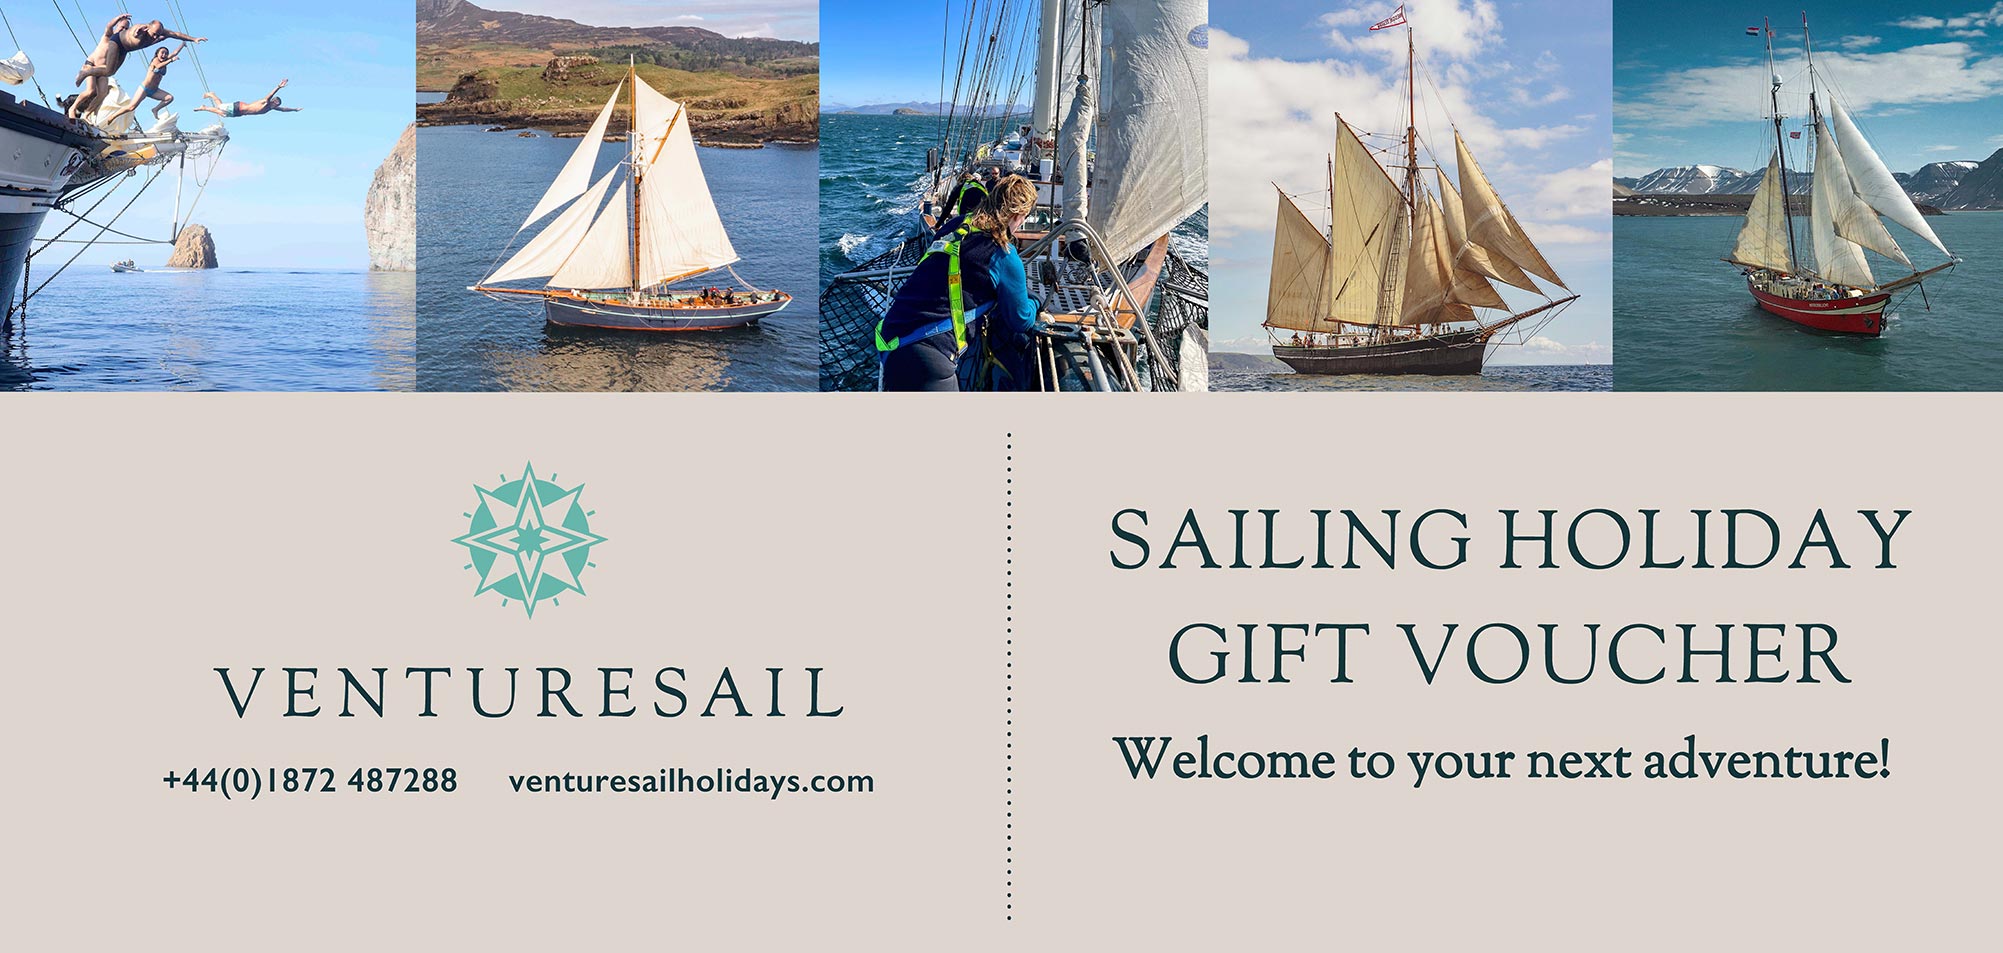 Sailing holiday gift vouchers for boat lovers and adventure seekers